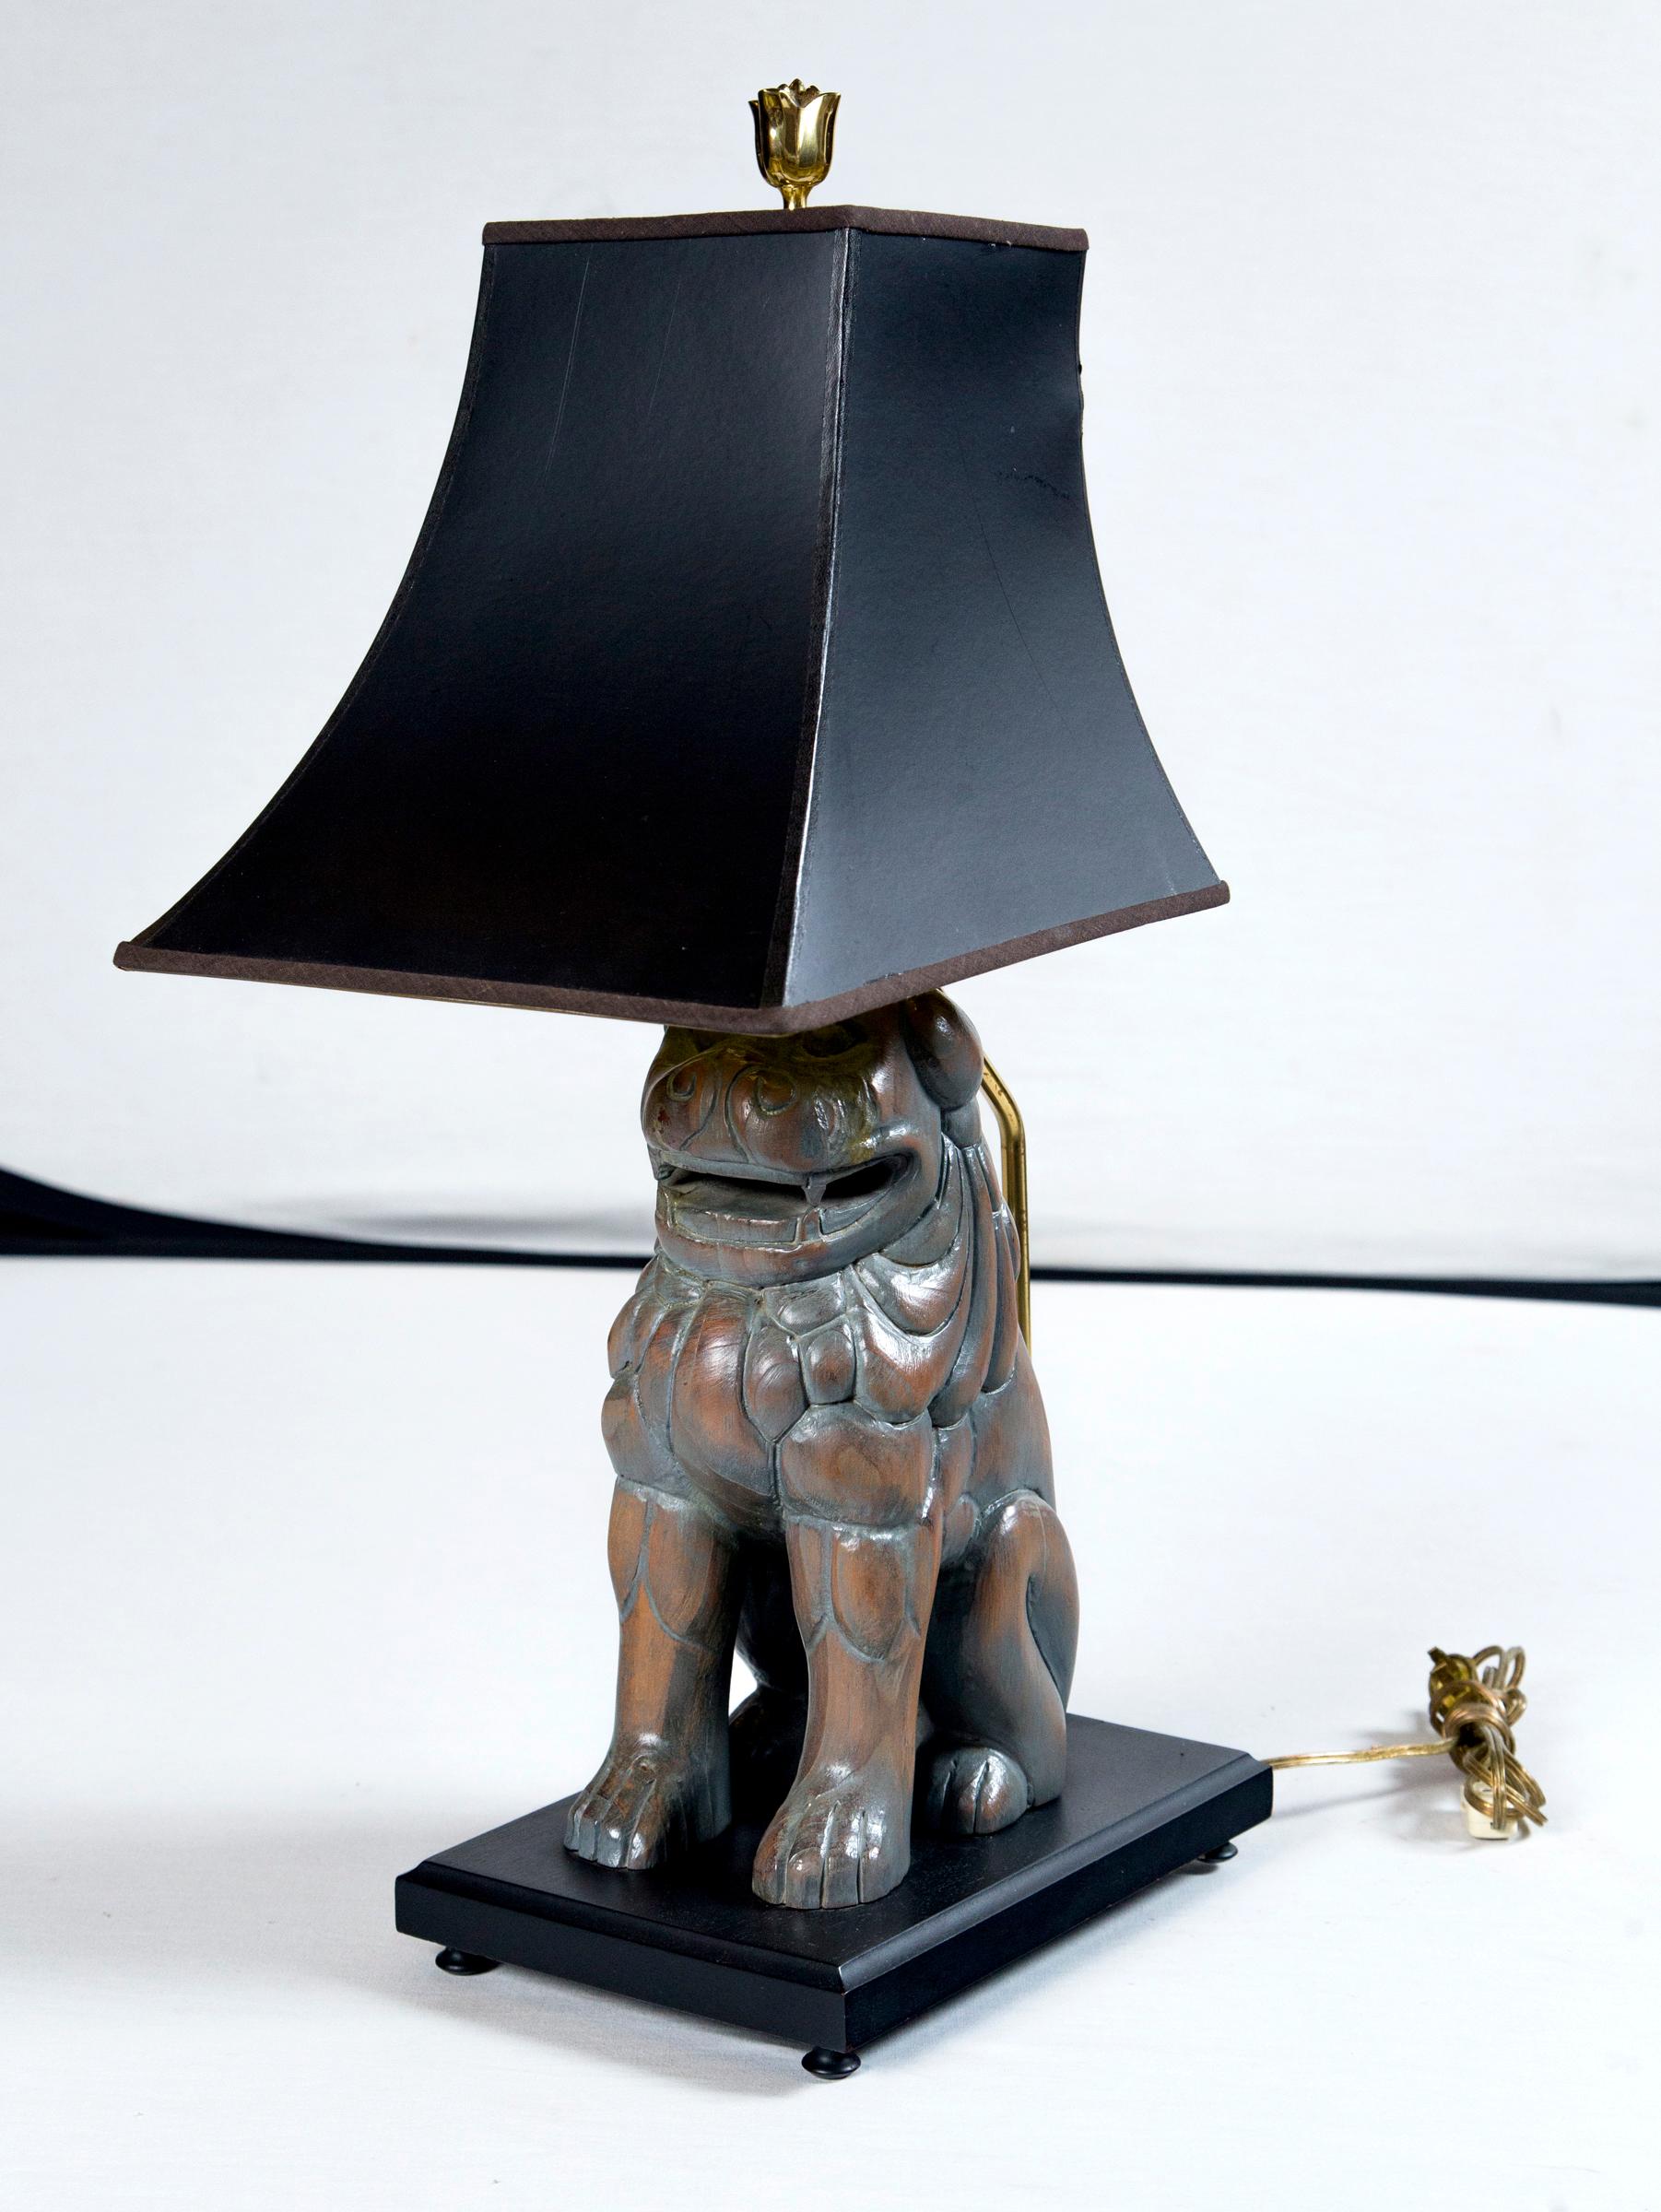 A pair of carved wood Foo Dog lamps by Sarreid of Spain. Shaped black paper lamp shades with gold interiors. Dogs are seated on black painted wood bases. Dogs alone are 5 inches wide by 7.5 inches deep by 12 inches high.
High quality workmanship